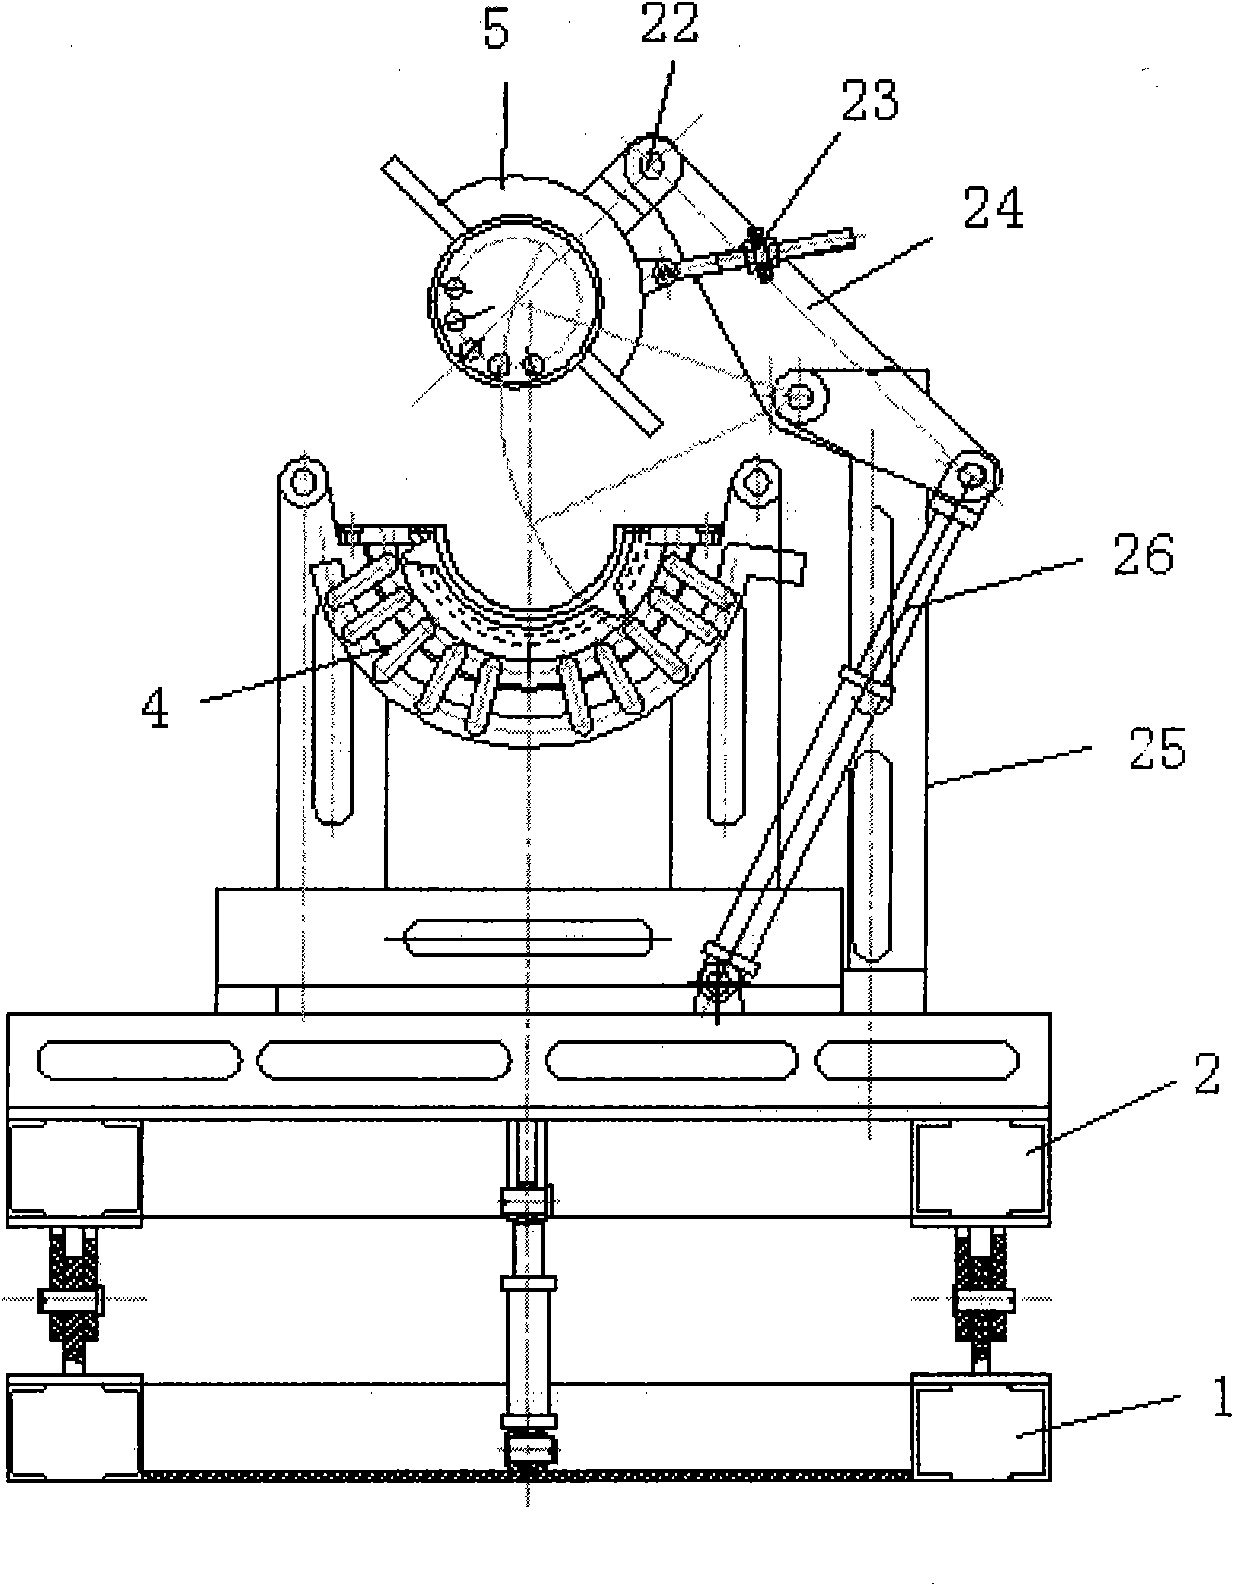 Casting mold for vortex-induced vibration suppression device